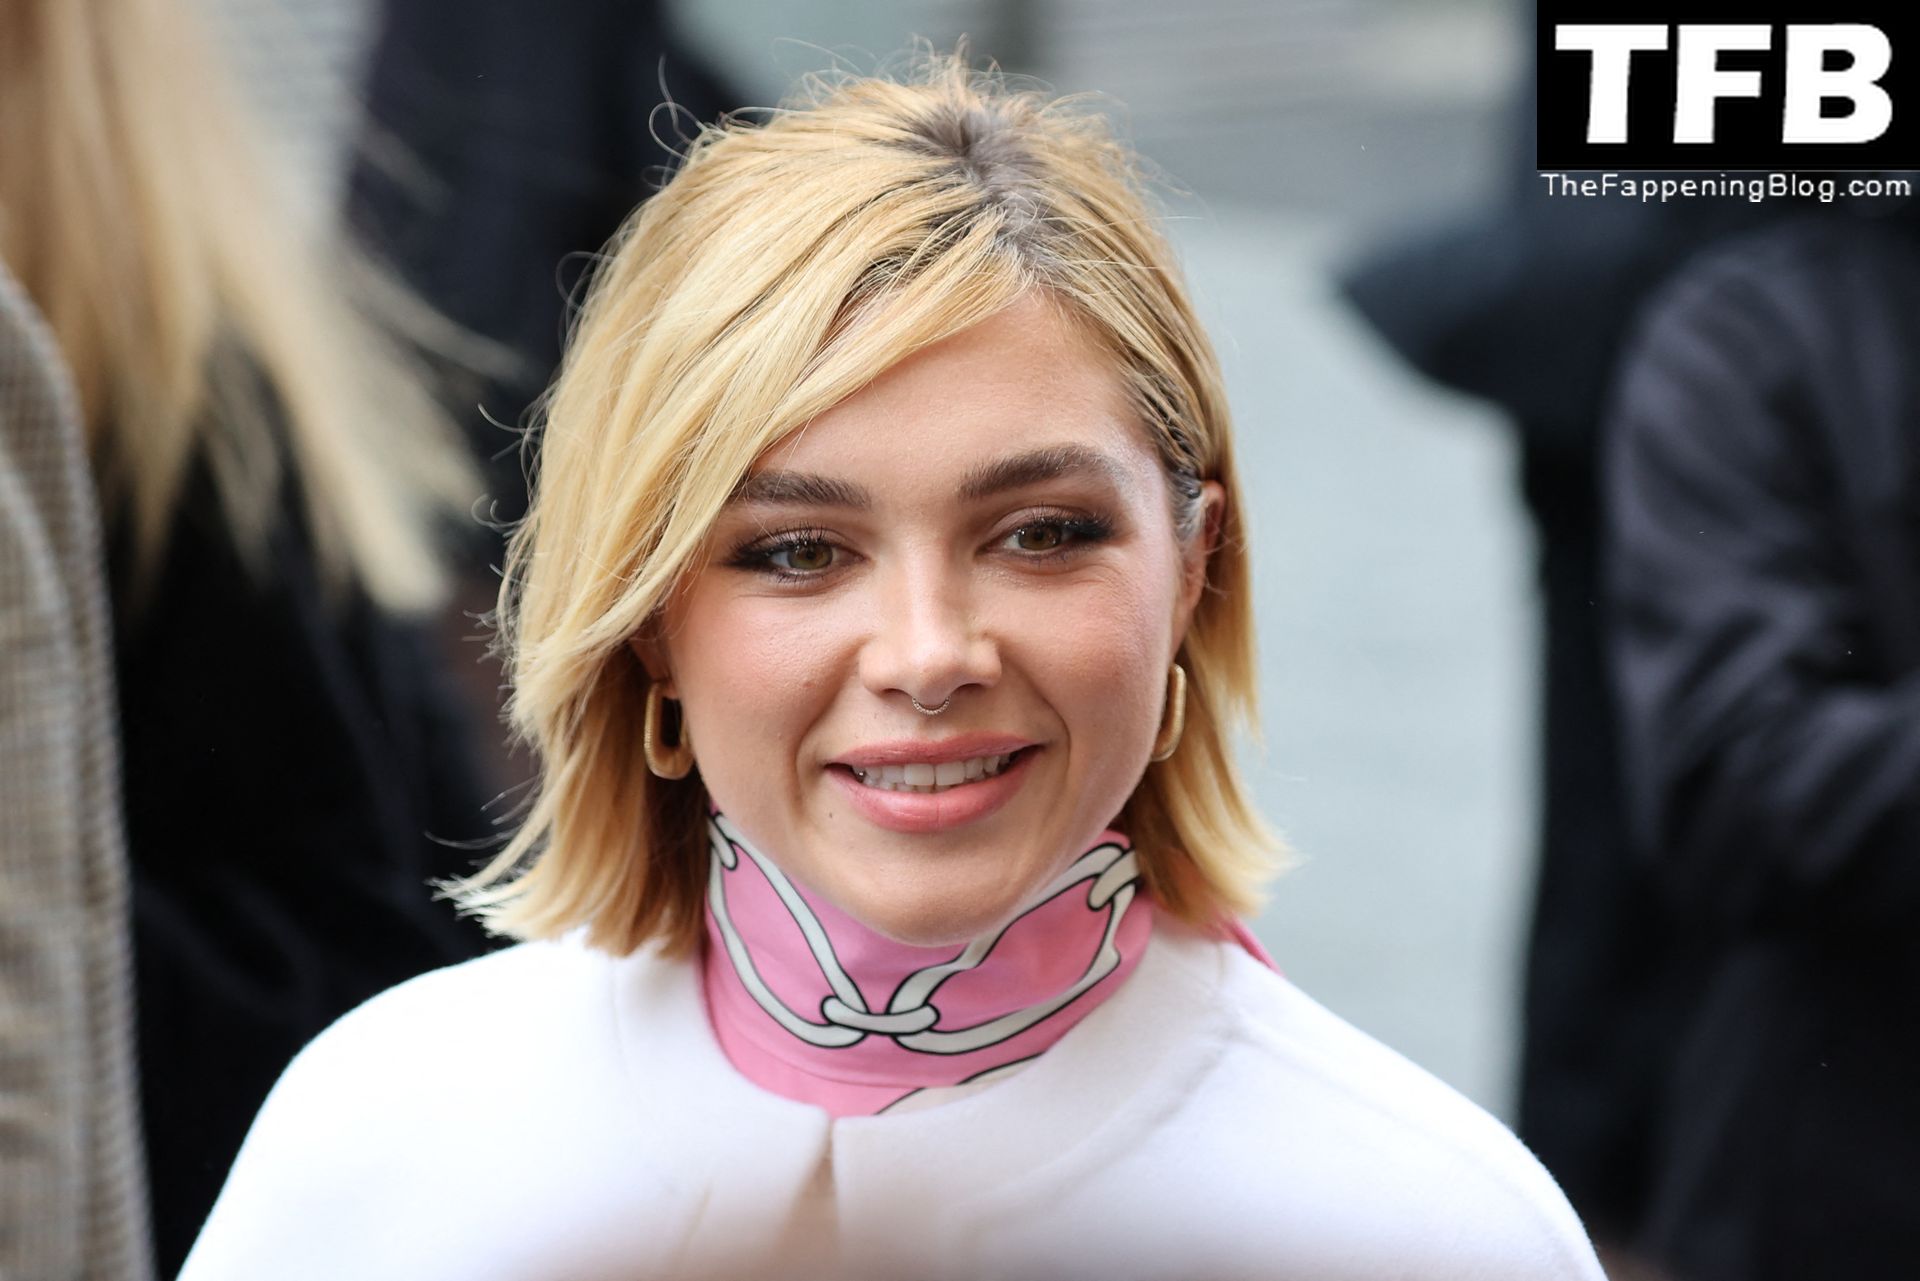 Florence-Pugh-Sexy-The-Fappening-Blog-77.jpg